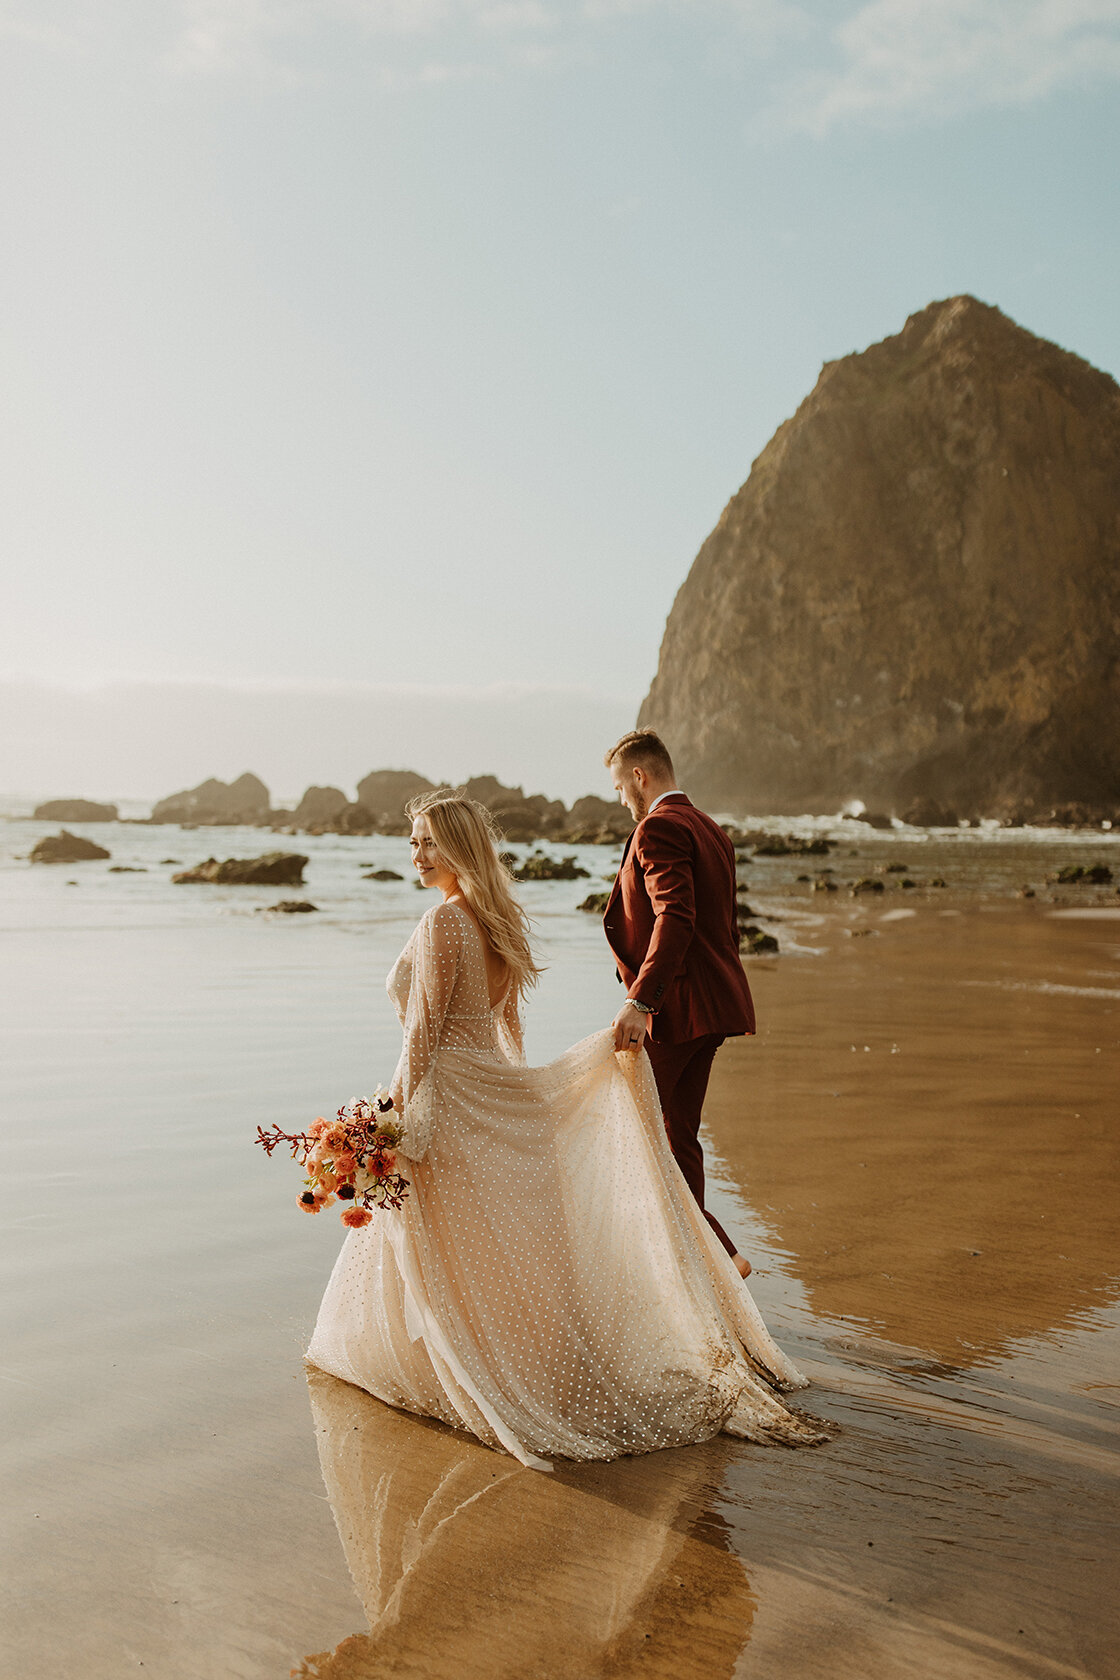 Lunella-Wedding-Gown-by-Willowby-Cannon-Beach-Elopement-12.jpg